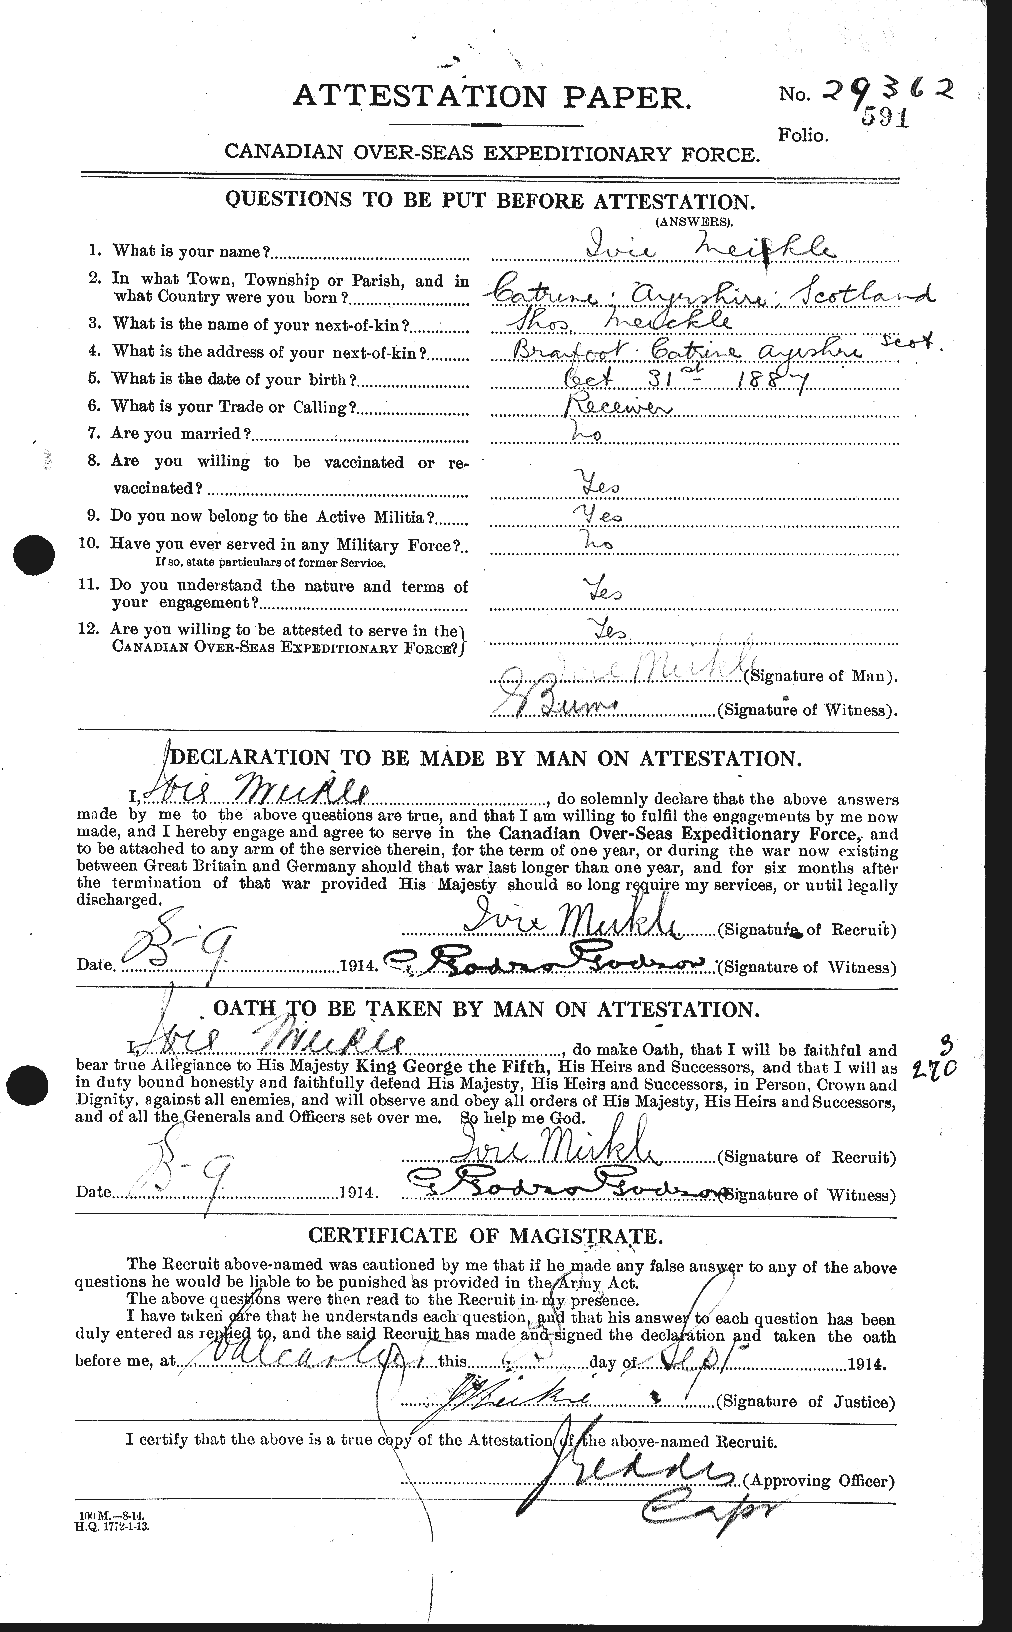 Personnel Records of the First World War - CEF 491883a